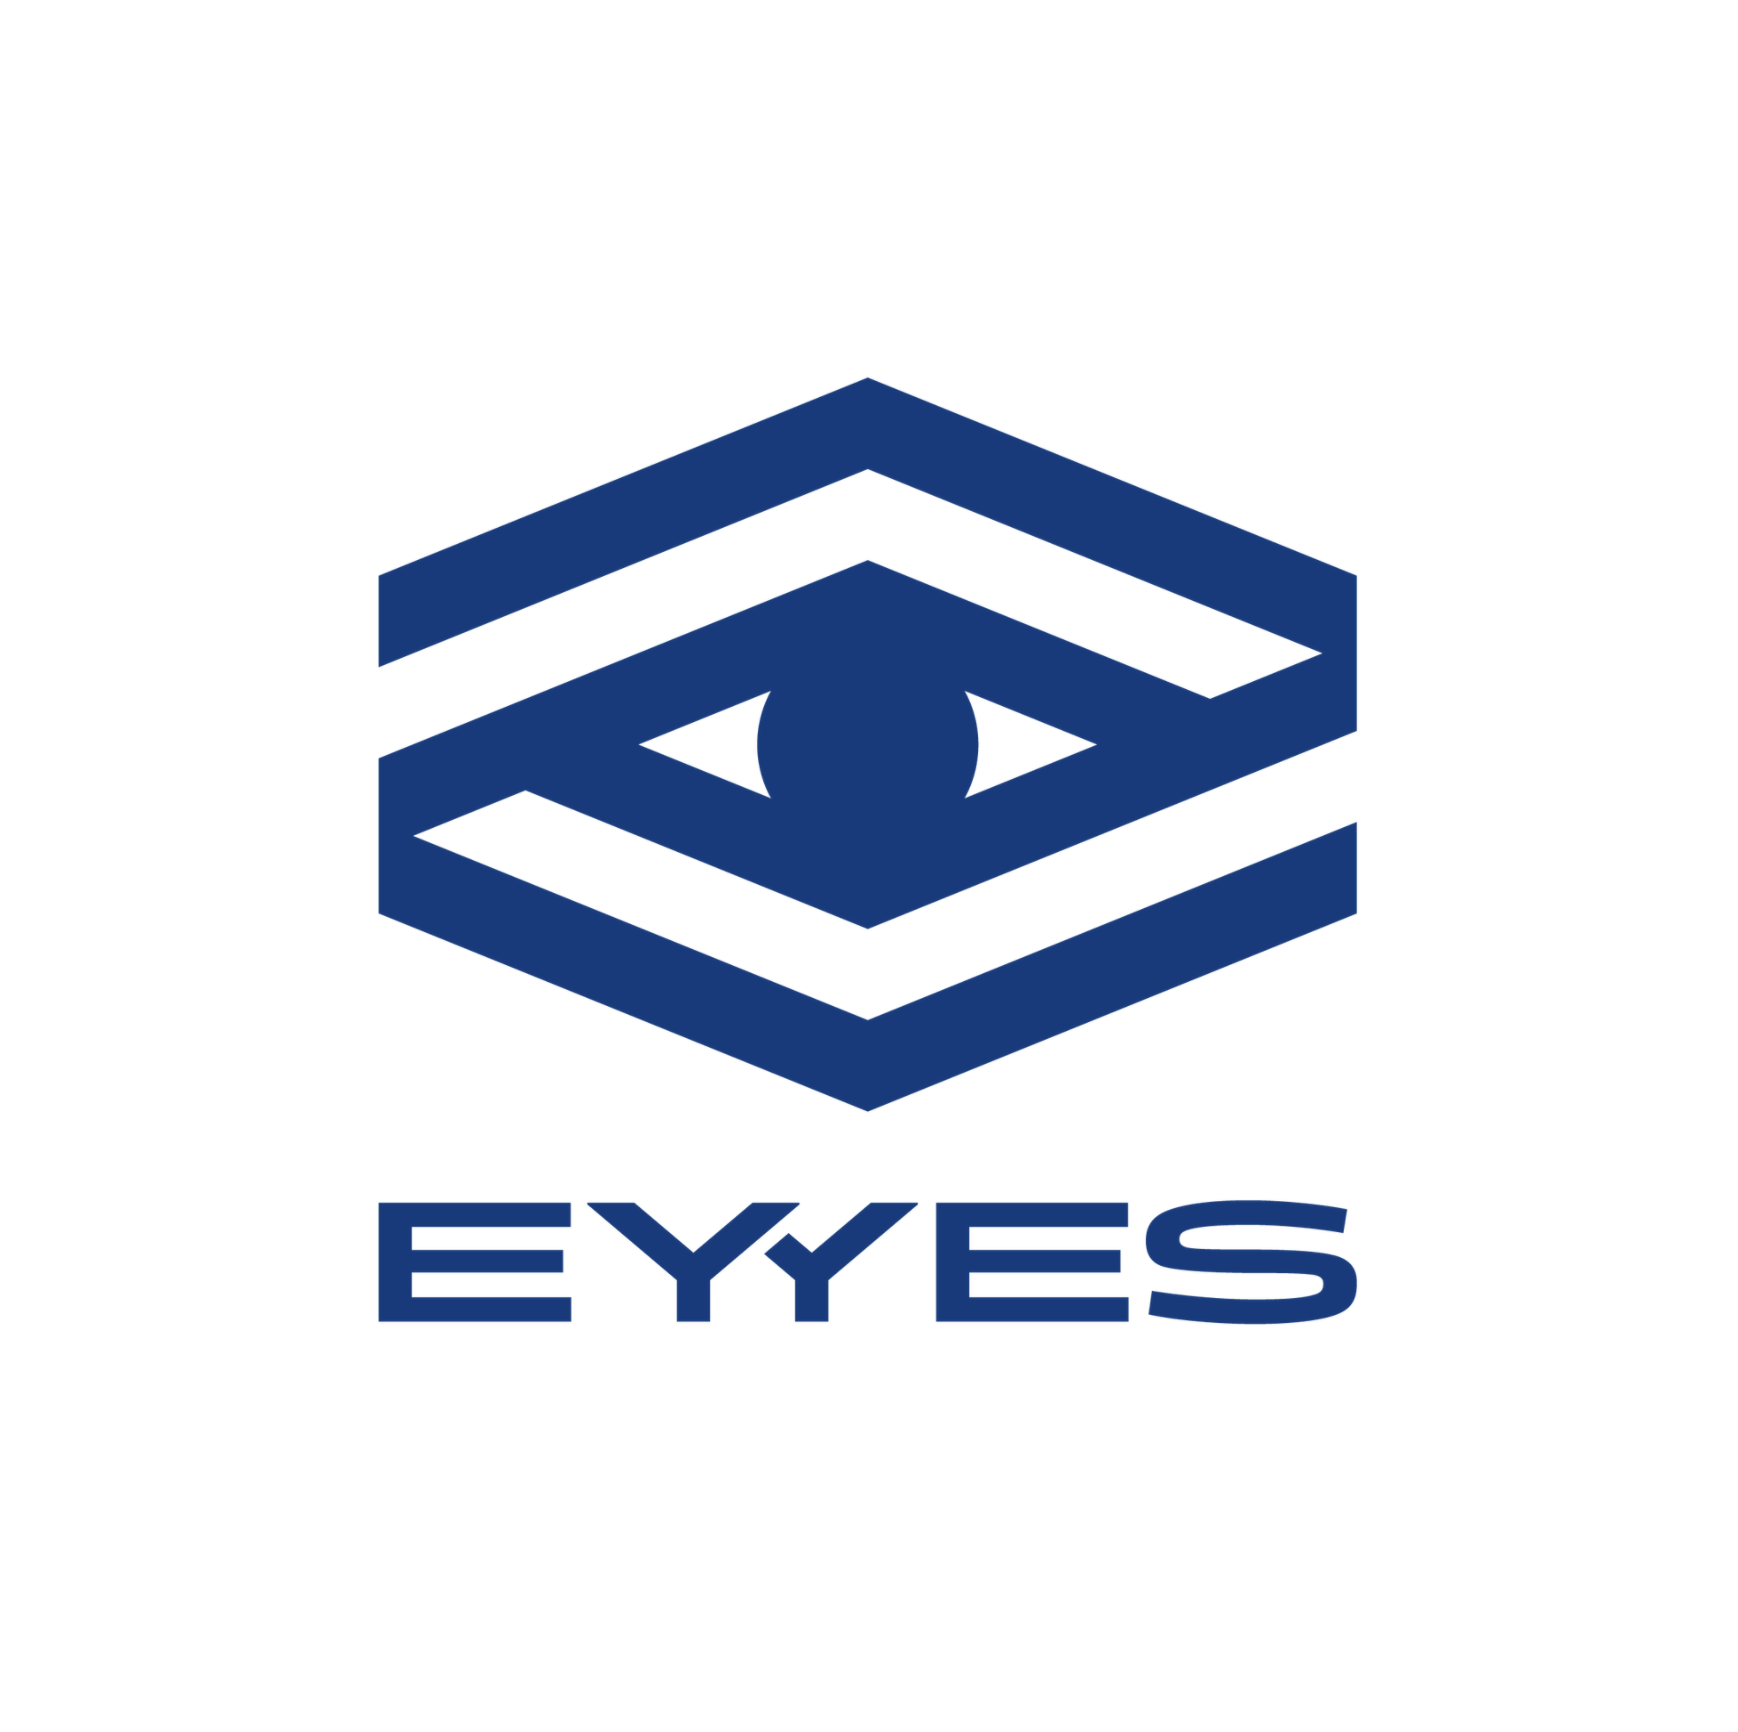 EYYES to Exhibit at IT-TRANS 2022